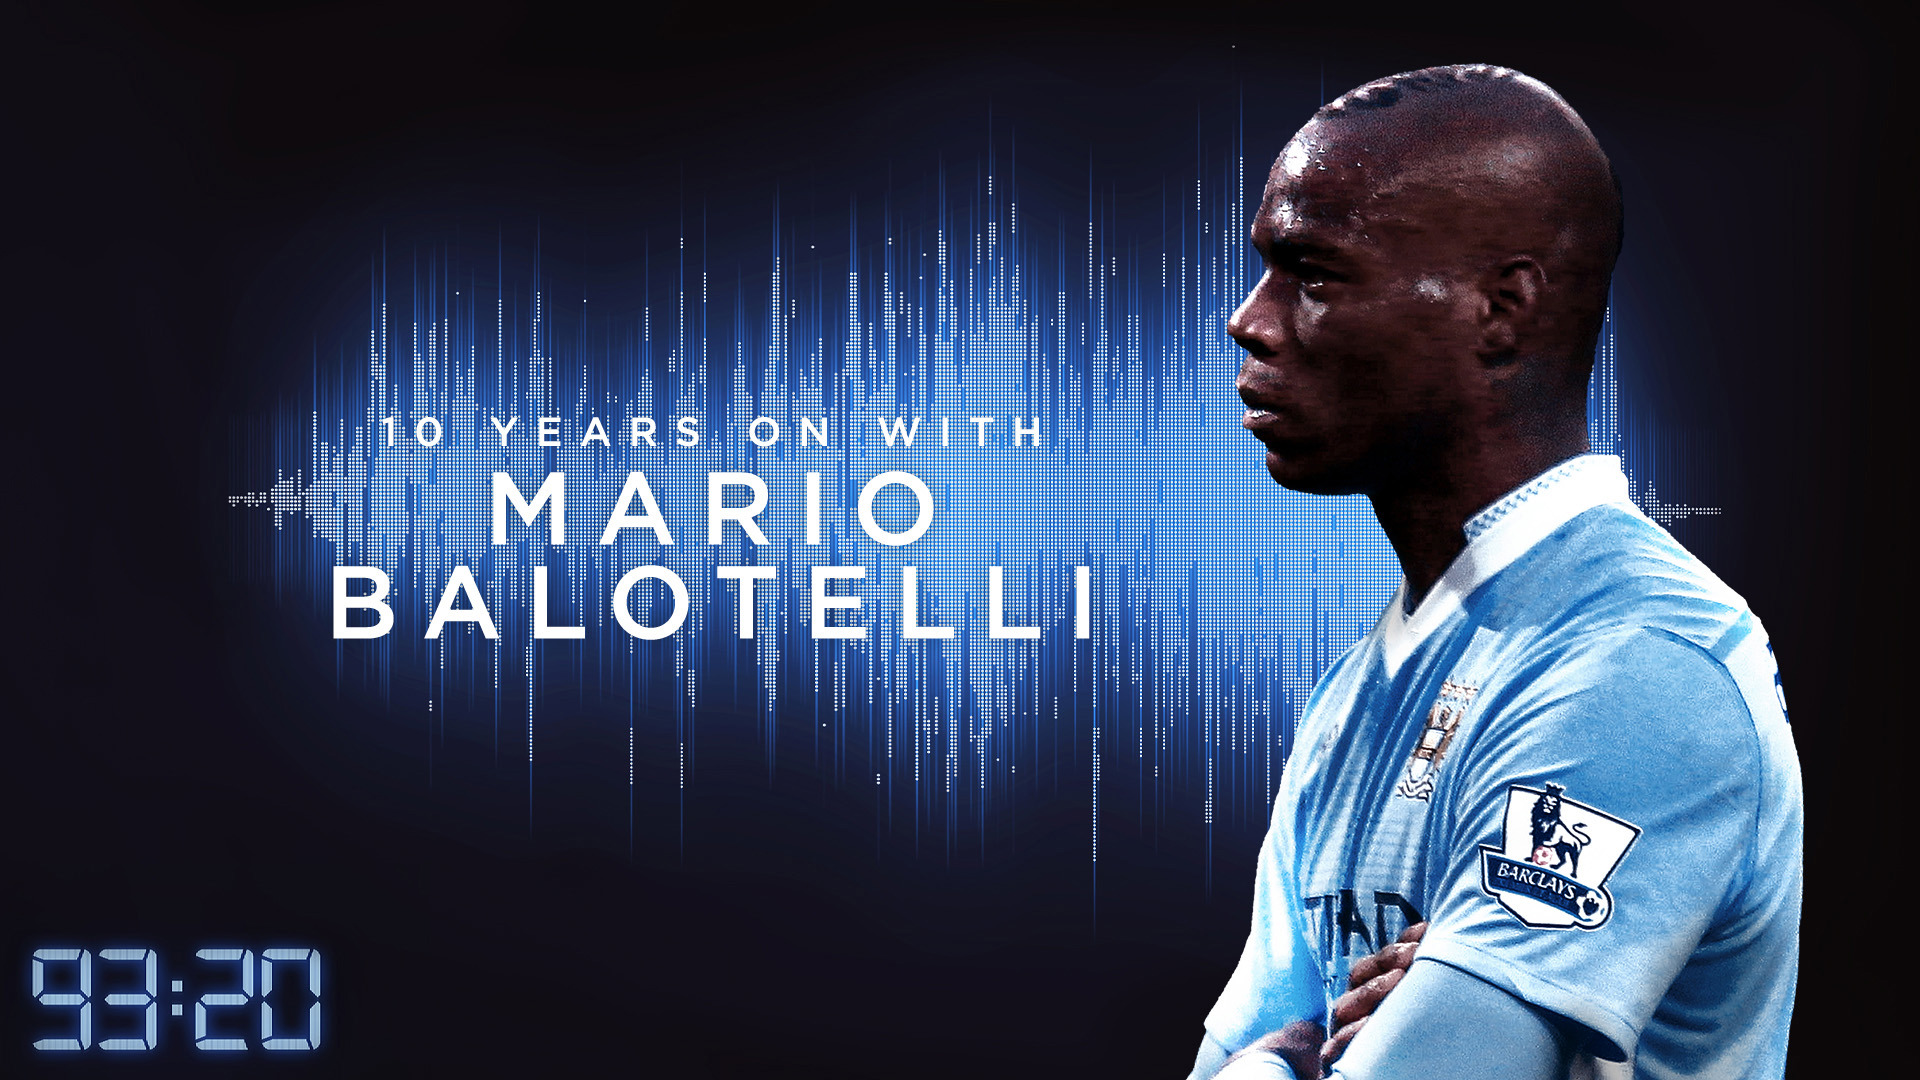 93:20 | Mario Balotelli extended interview